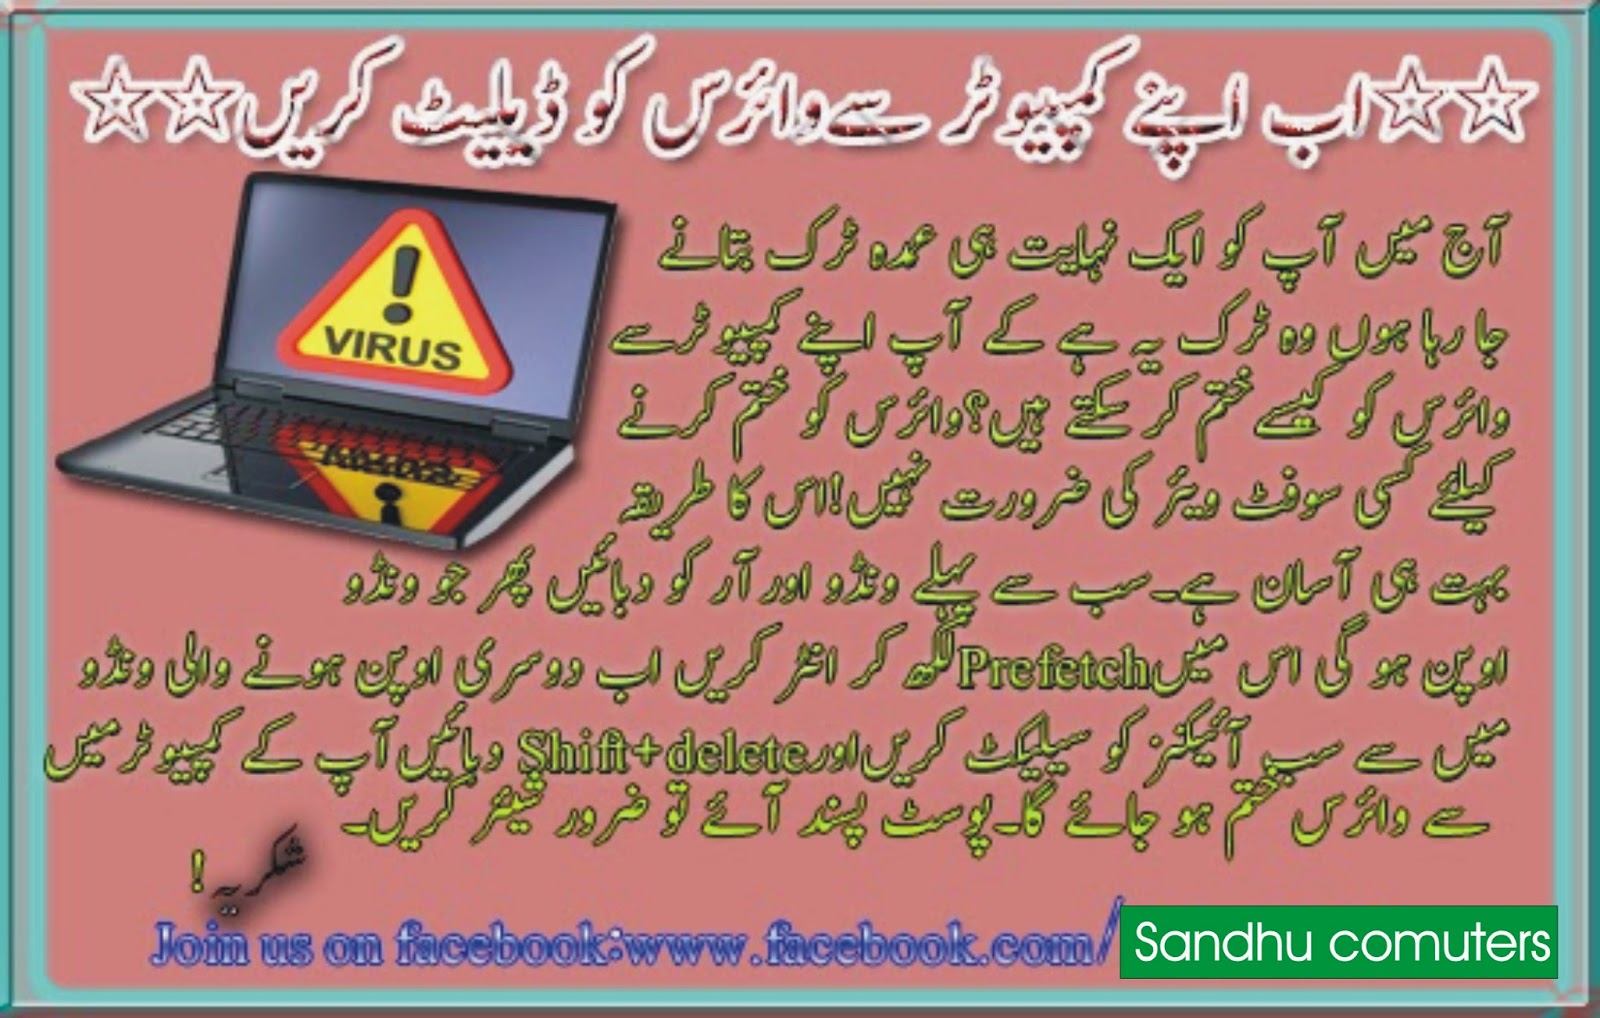 no viras your comuter with sandhu computers